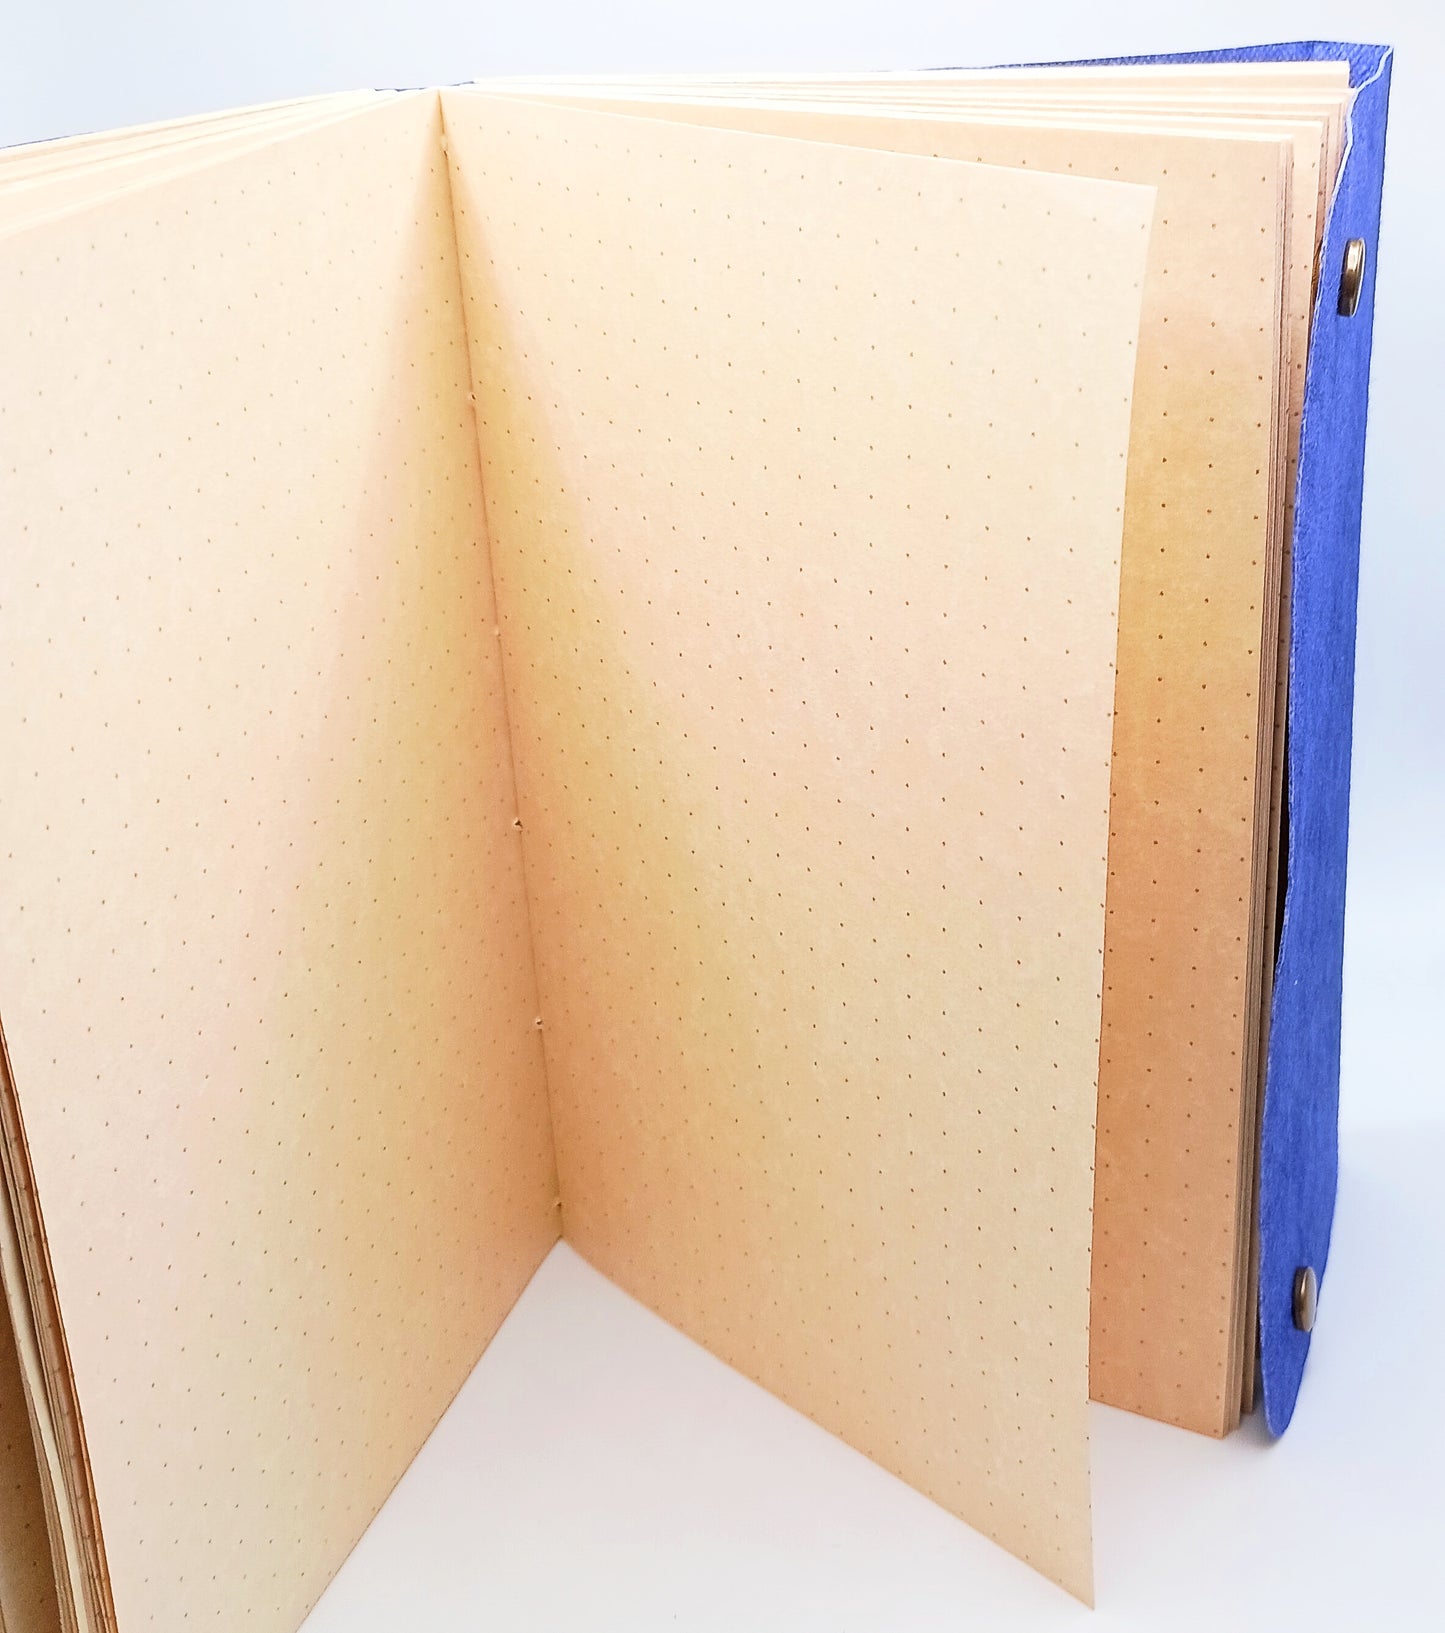 Jewel-Tone Journals with Parchment